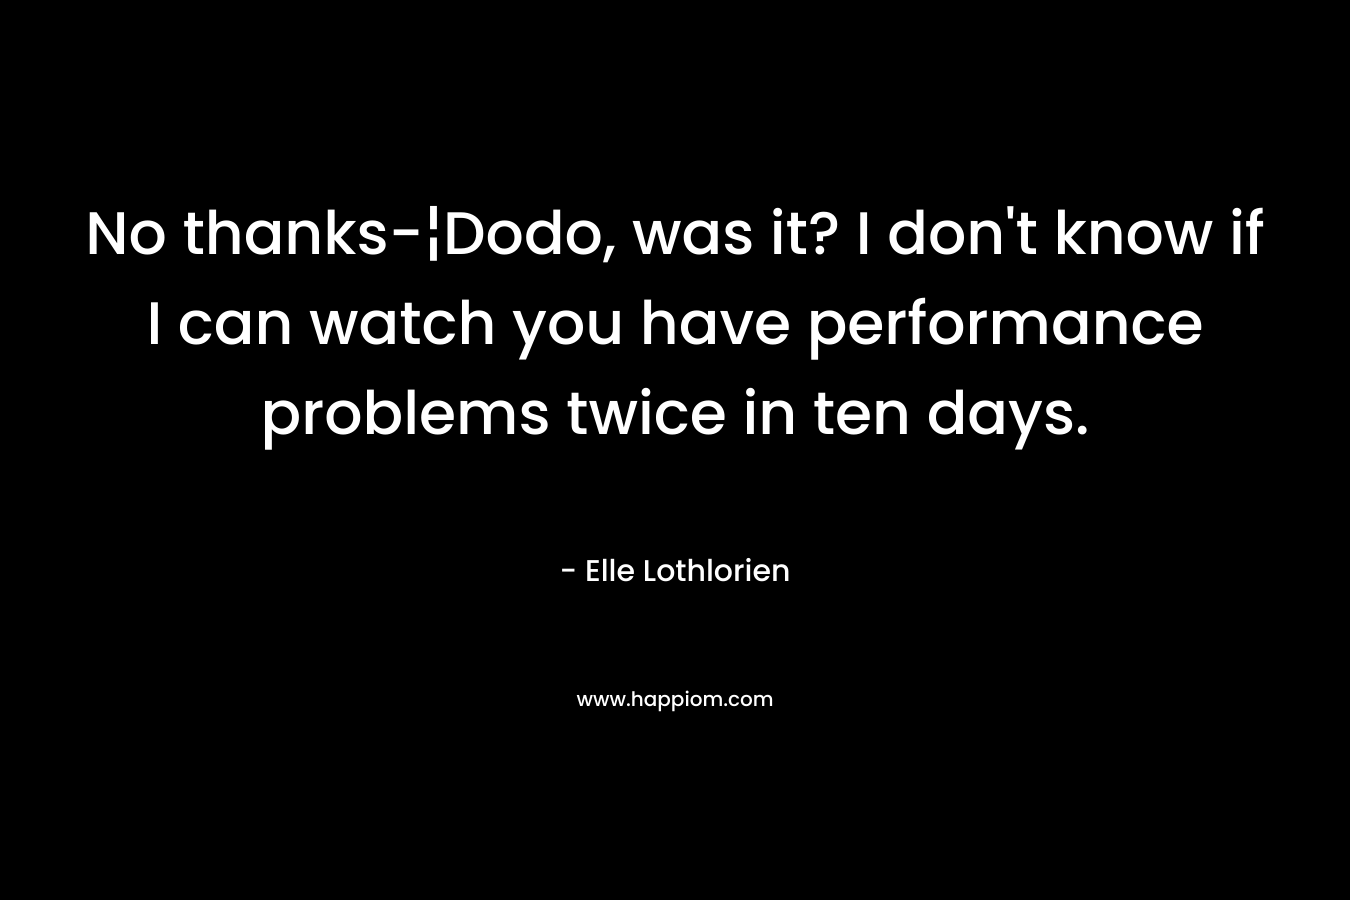 No thanks-¦Dodo, was it? I don't know if I can watch you have performance problems twice in ten days.